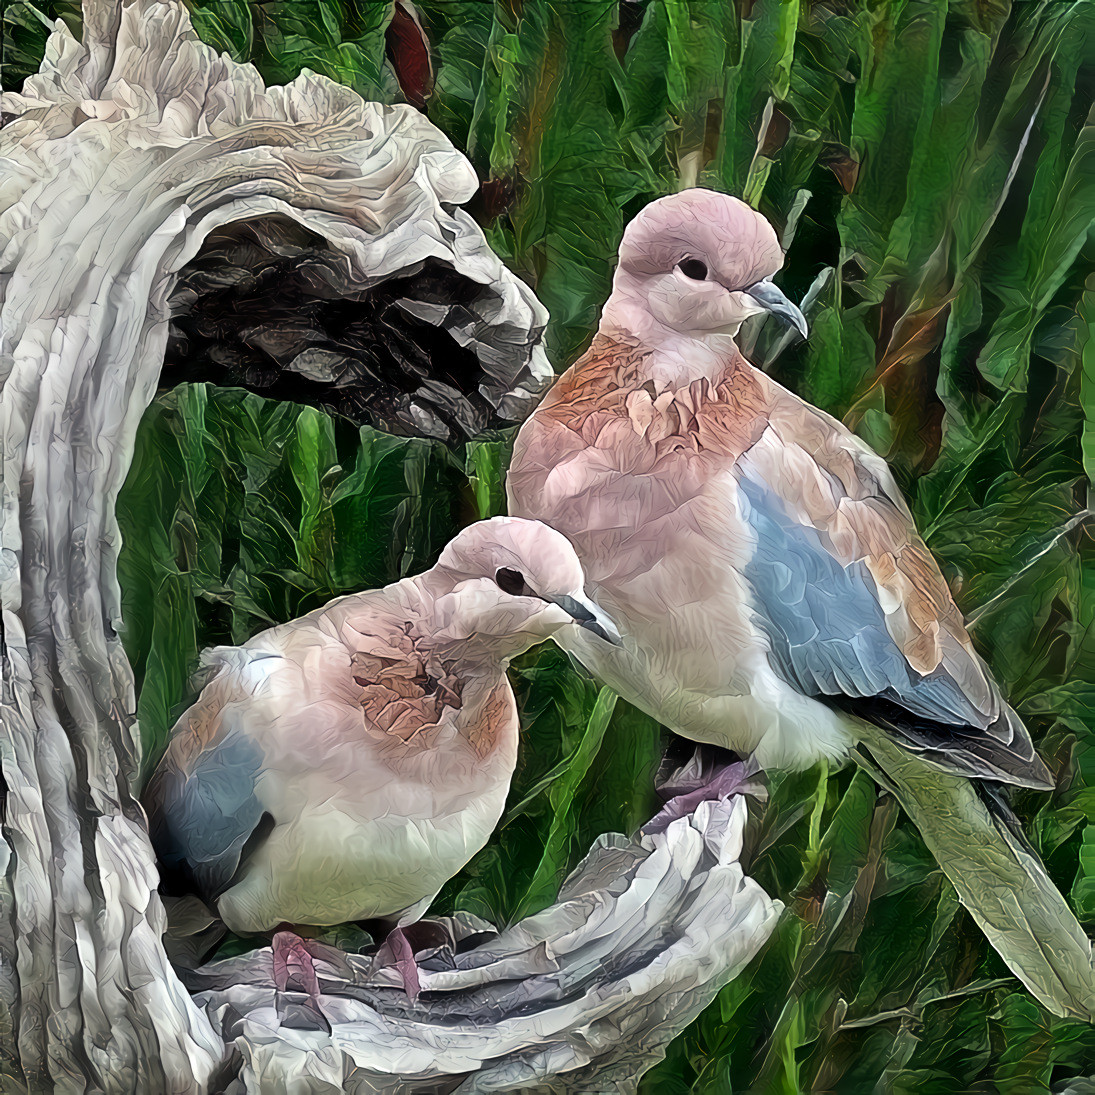 Laughing Dove / Palm Dove / Spilopelia senegalensis, is a dove species that breeds in Africa, the Indian subcontinent, Middle East, and Western Australia.